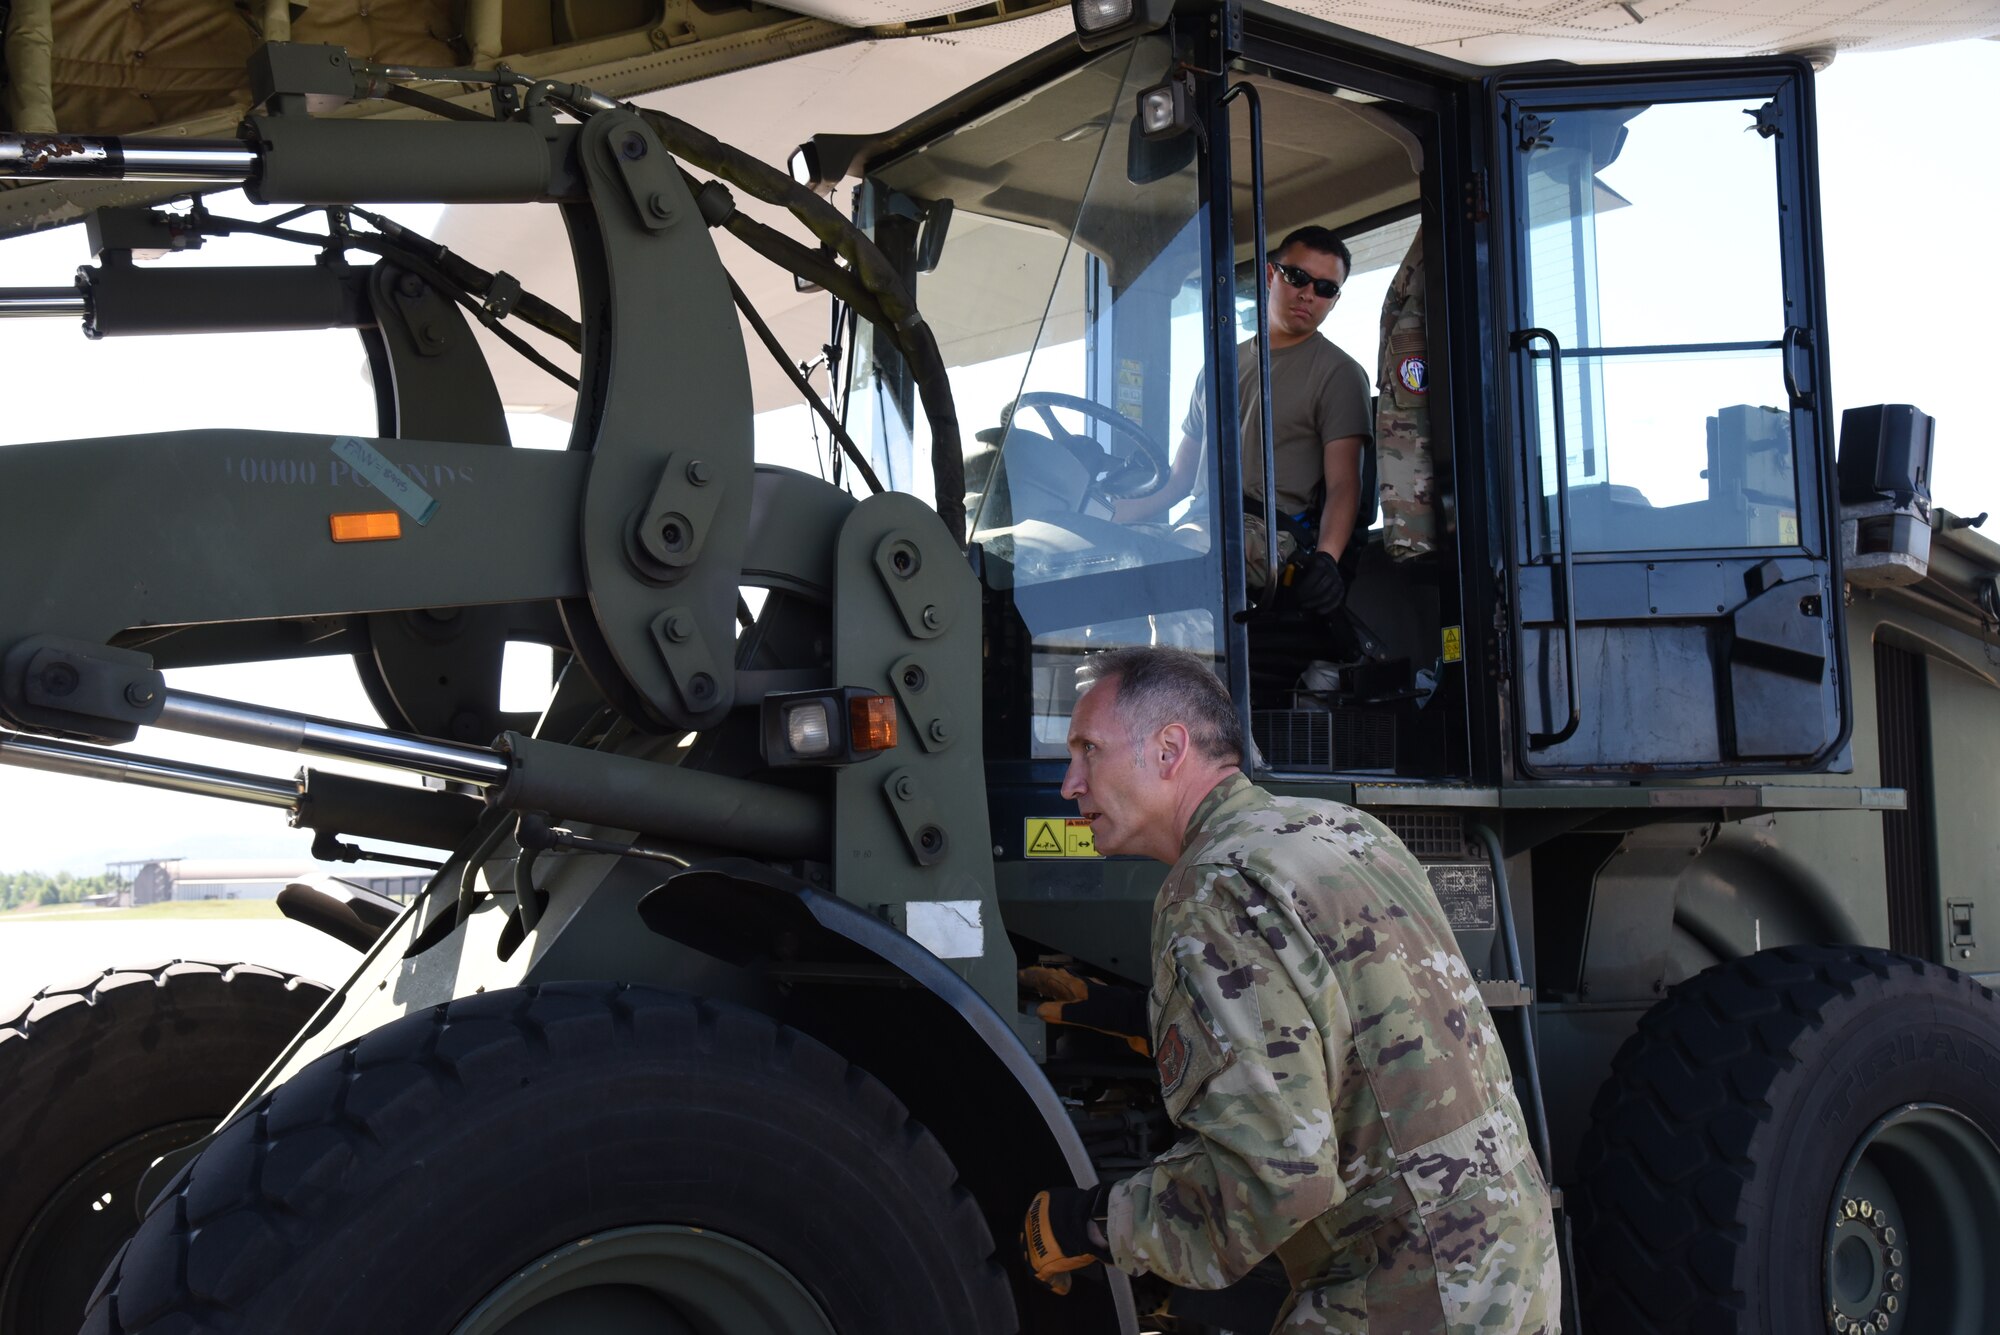 Master Sgt. Douglas Otten Jr, loadmaster for the 815th Airlift Squadron from the 403rd Wing, directs Senior Airman Daniel Morales, 26th Aerial Port Squadron, Lackland Air Force Base, Texas, who was driving a forklift to load a cargo pallet onto a C-130J for exercise Swift Response 19, June 19, 2019. The exercise is one of the premier military crisis response training events featuring high readiness airborne forces from eight NATO nations. Activities include intermediate staging base operations, multiple airborne operations, and several air assault operations. The Swift Response exercises have had great success in creating a foundation for the strong relationships we share with several European allies and partners today. (U.S. Air Force photo by Master Sgt. Jessica Kendziorek)